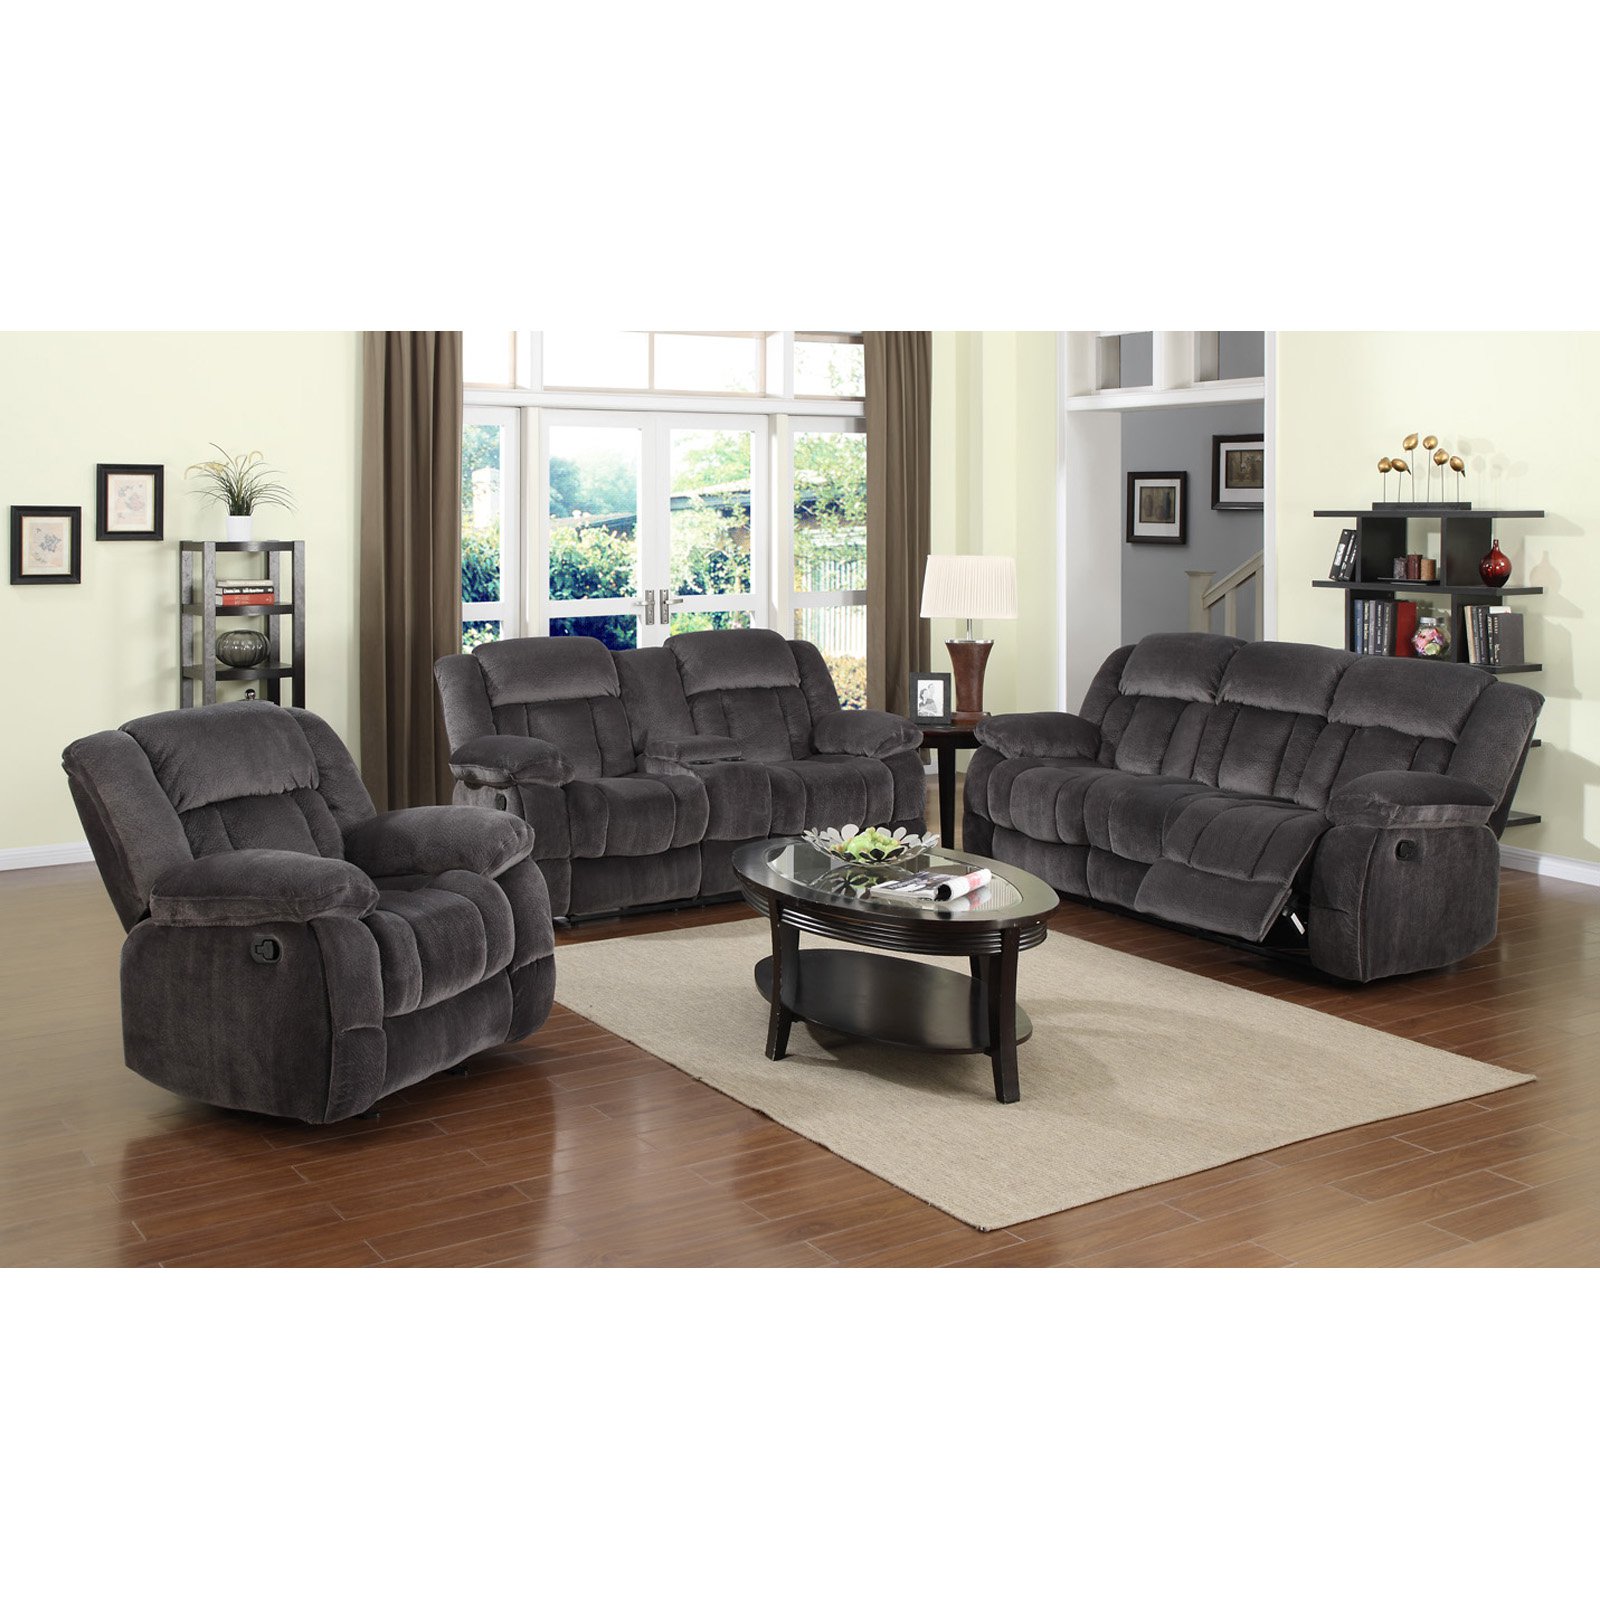 Sunset Trading Madison 3 Piece Reclining Living Room Set - Charcoal